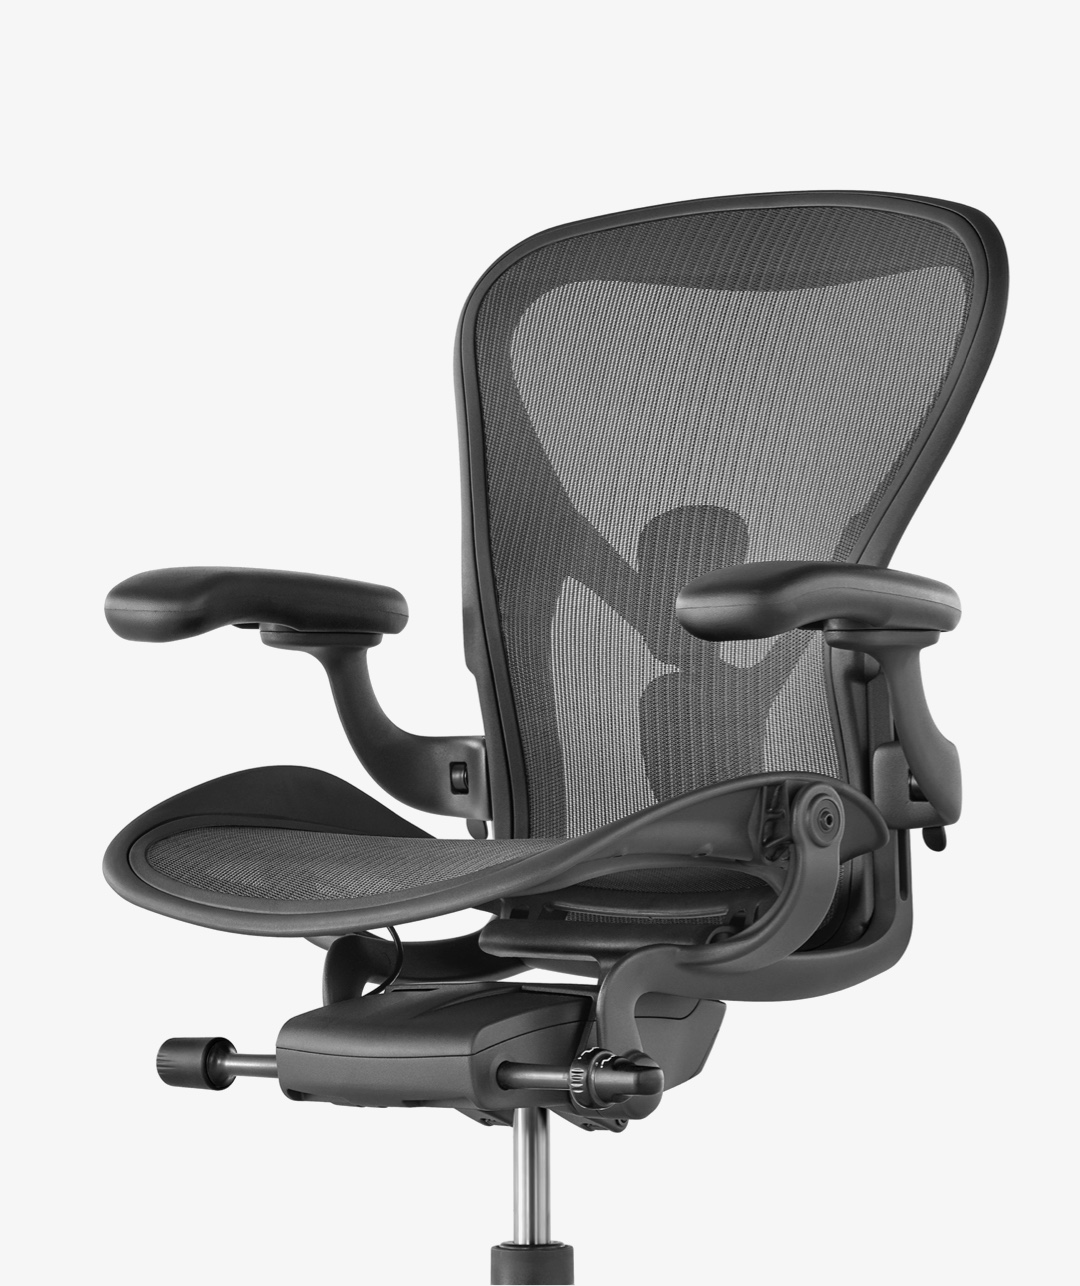 Photo of new Aeron chair in Graphite finish, from the tilt mechanism up